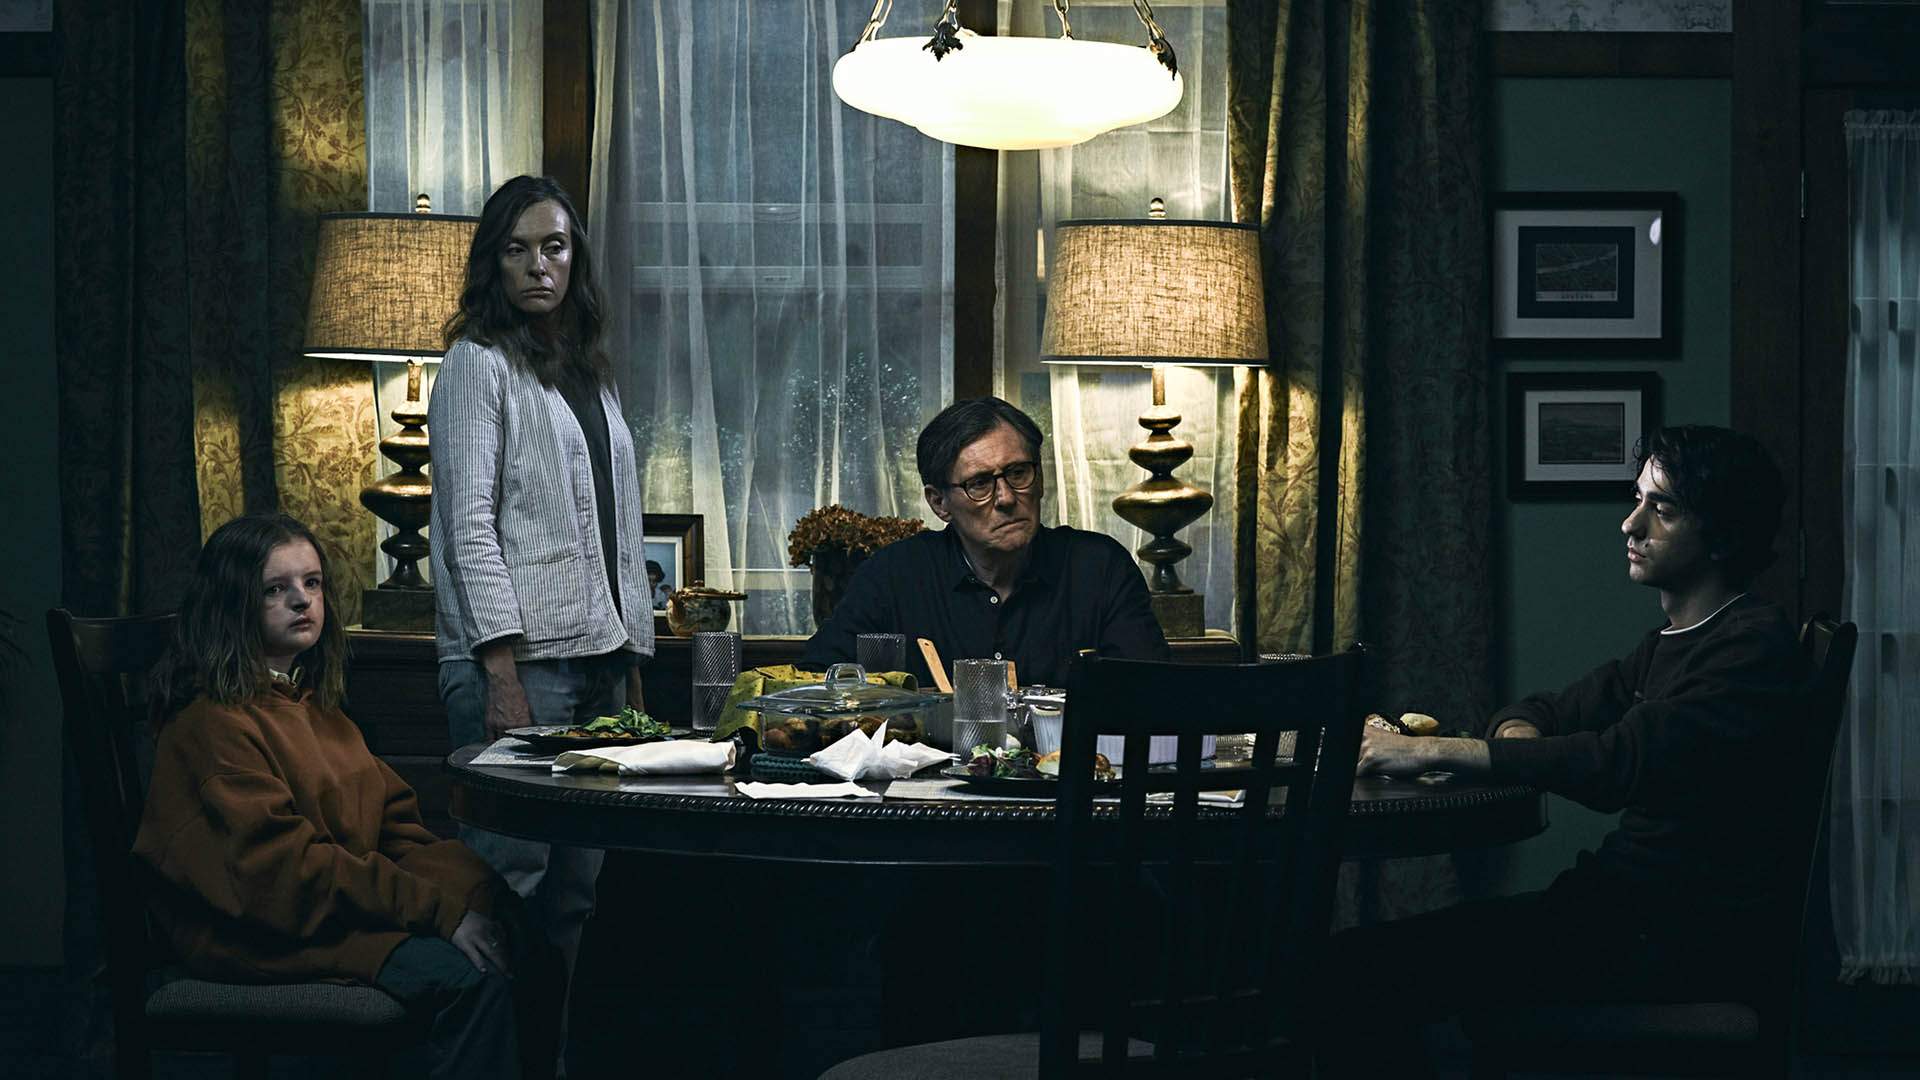 Behind the Scenes of 2018's Scariest Film with 'Hereditary' Director Ari Aster